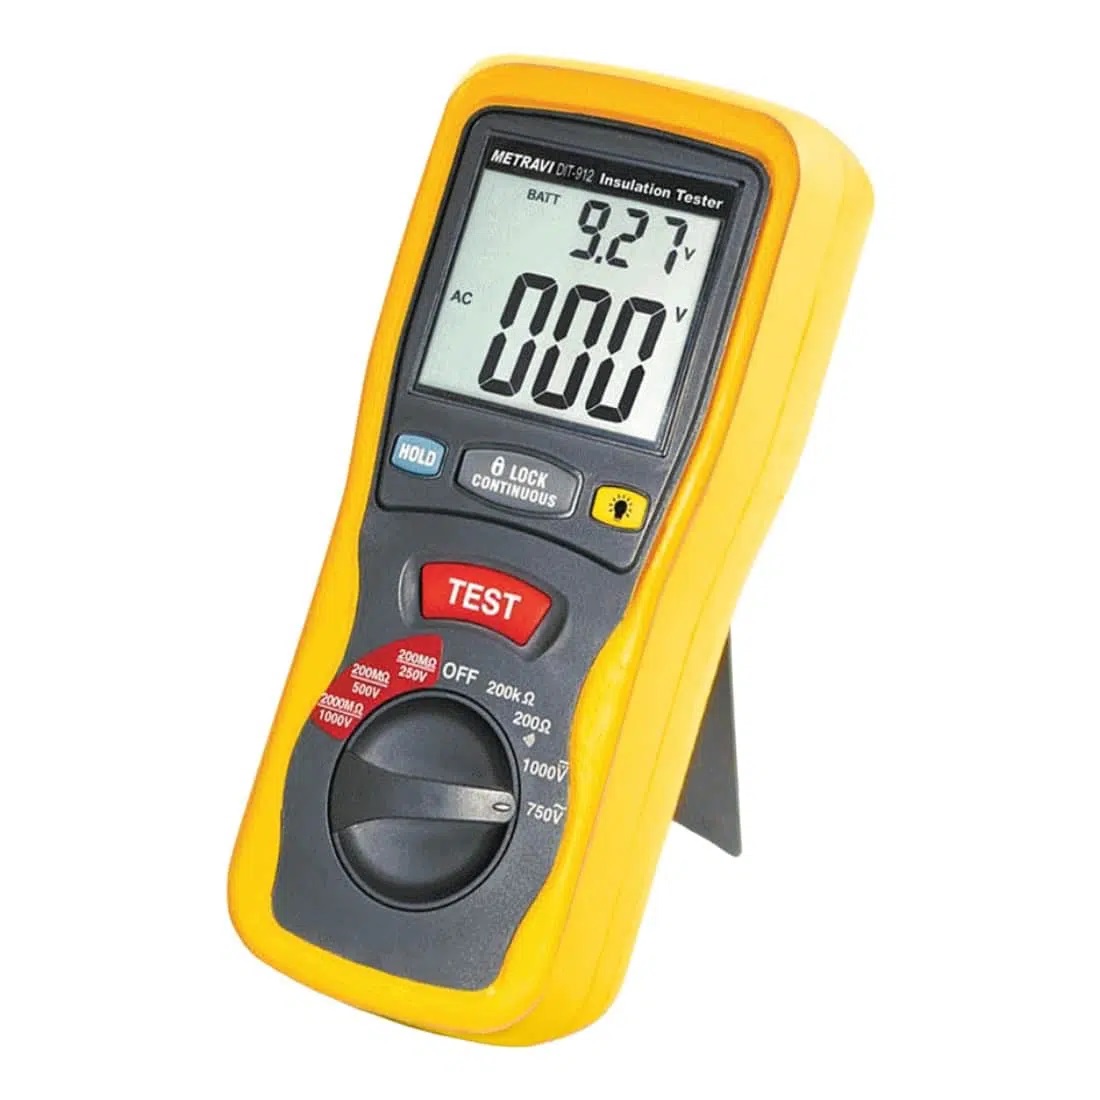 Metravi DIT-912 Fully-protected Digital Insulation Tester with Analogue Bargraph